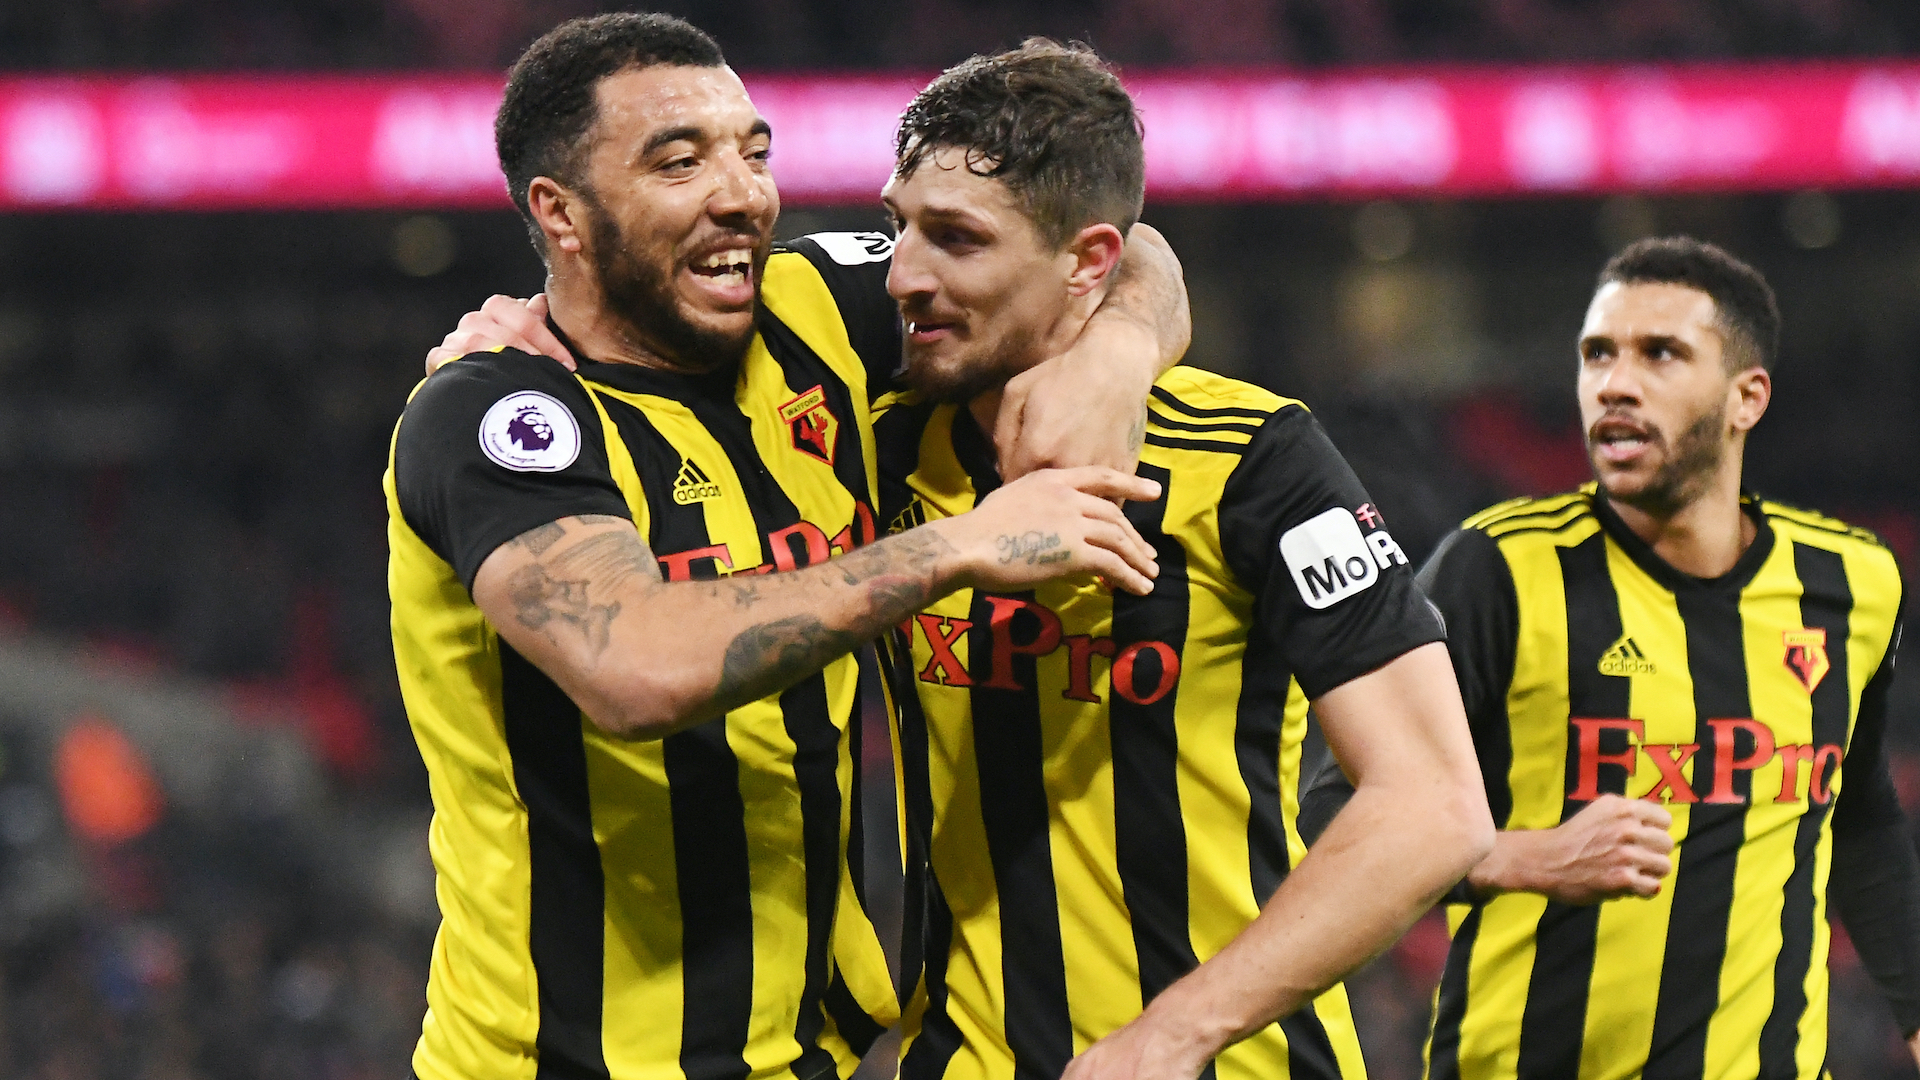 Craig Cathcart celebrates with Troy Deeney after scoring a goal during the 2018/19 Premier League game between Tottenham Hotspur and Watford FC at Wembley Stadium.